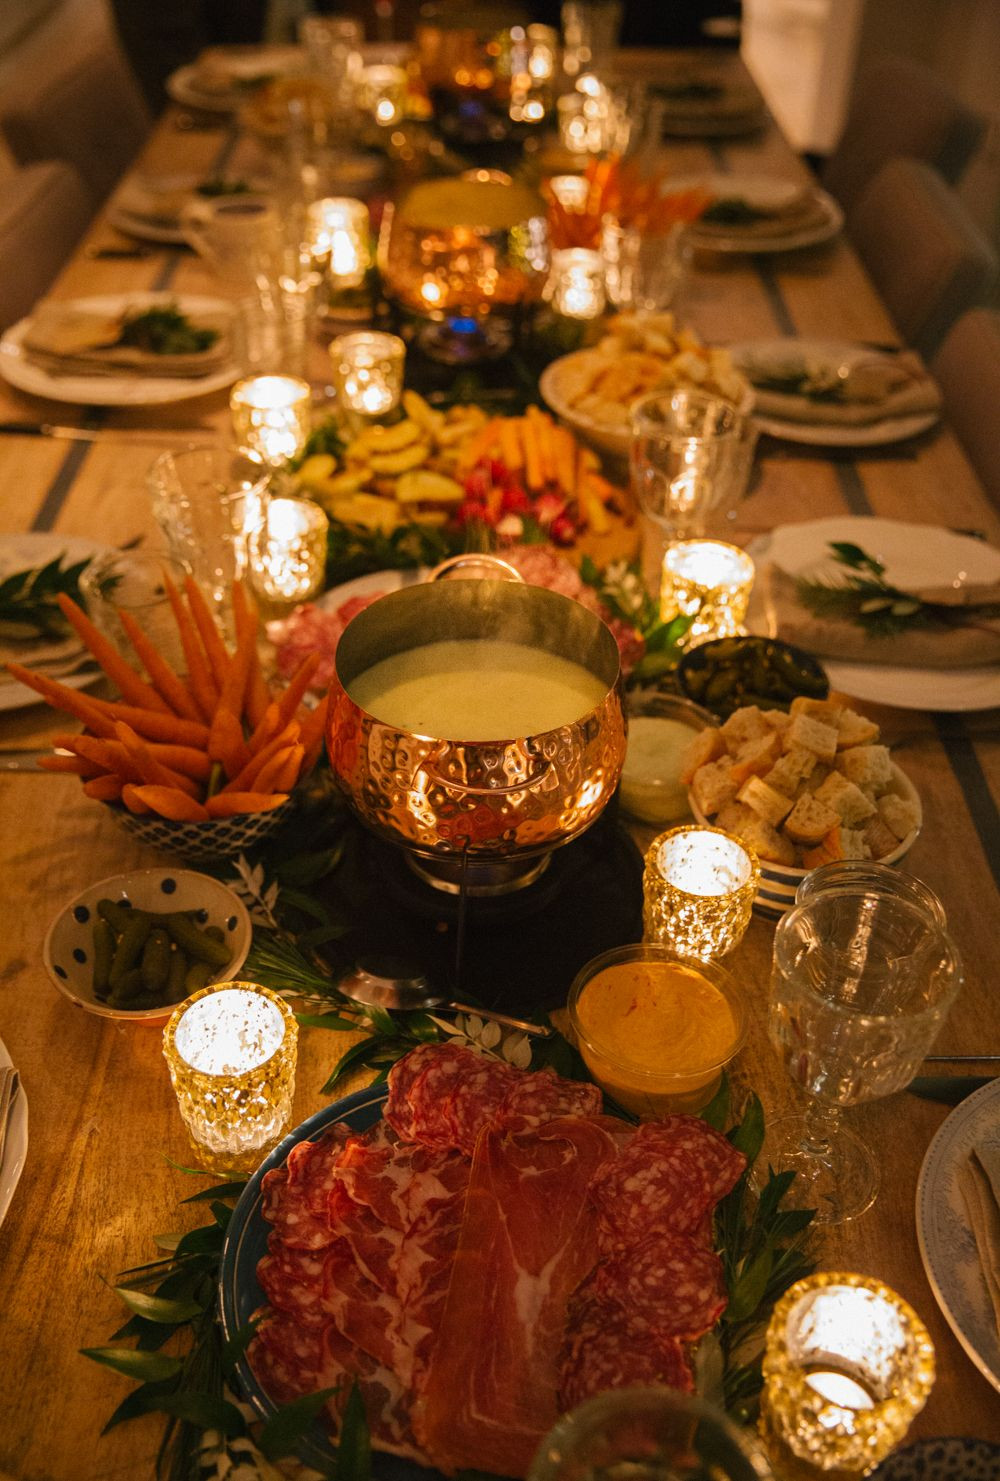 Christmas Fondue Party Ideas
 How to host the ultimate fondue dinner party